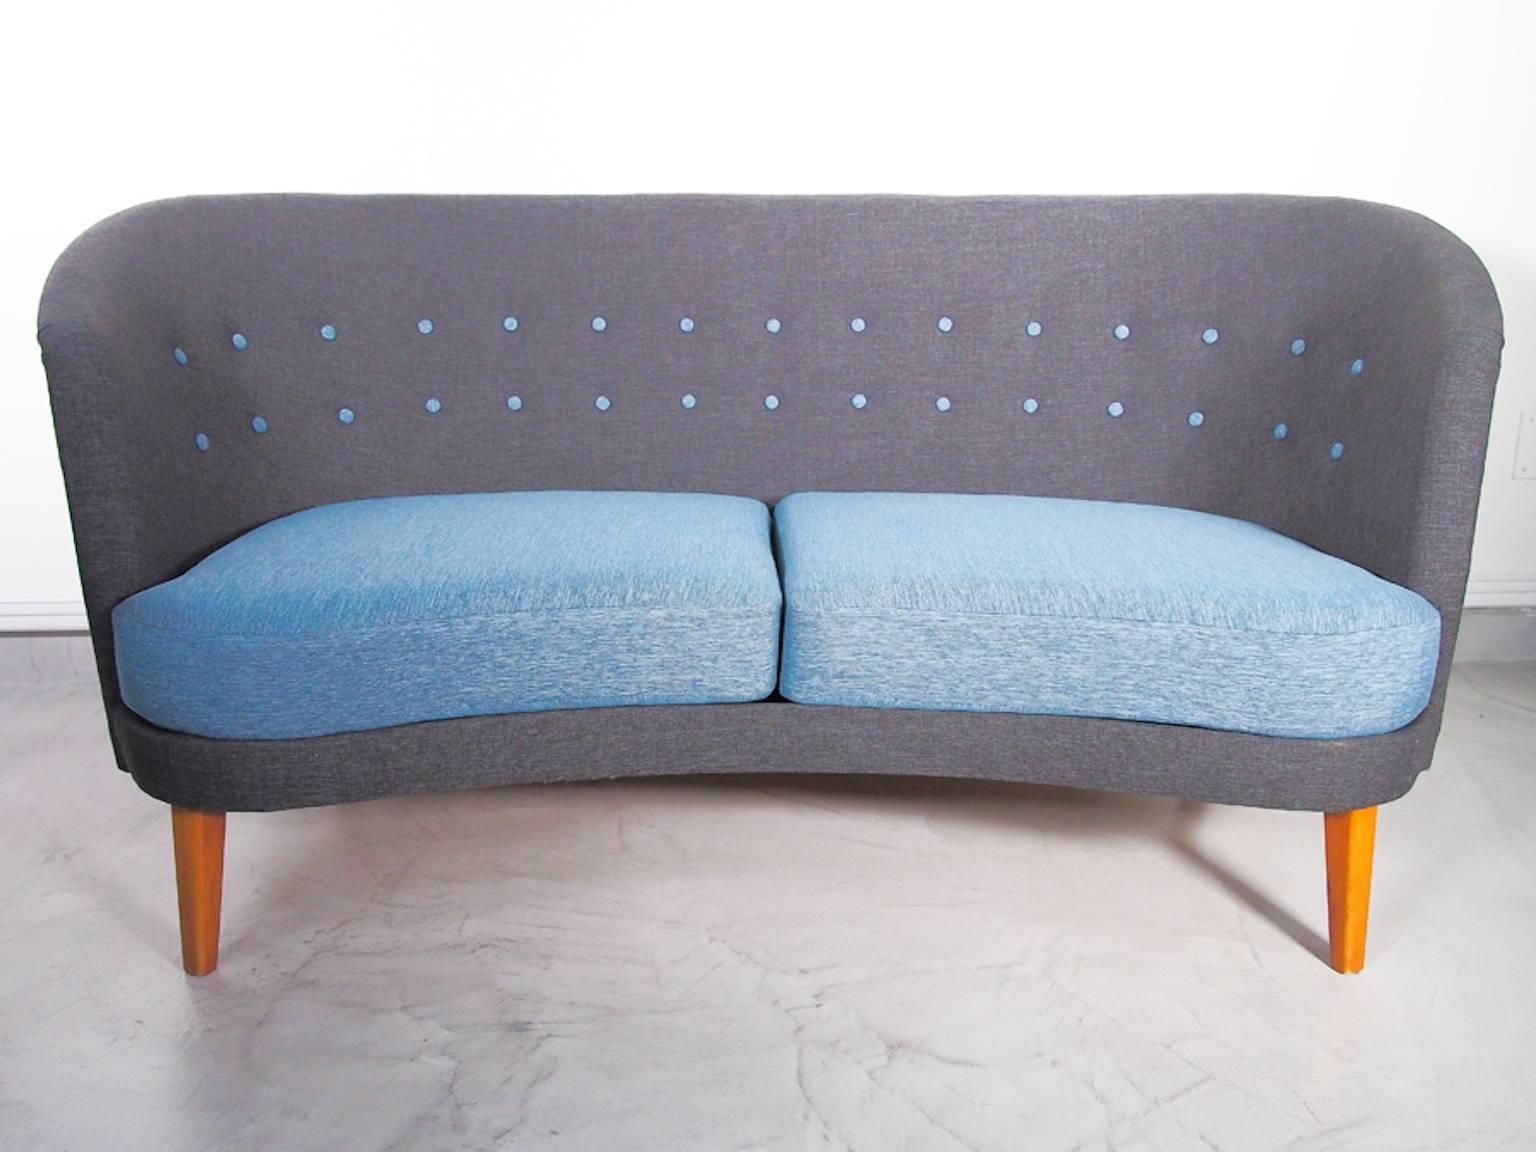 Slightly curved sofa with blue fabric seat upholstery and with a button-tufted grey back. Stained wood legs, later upholstery.